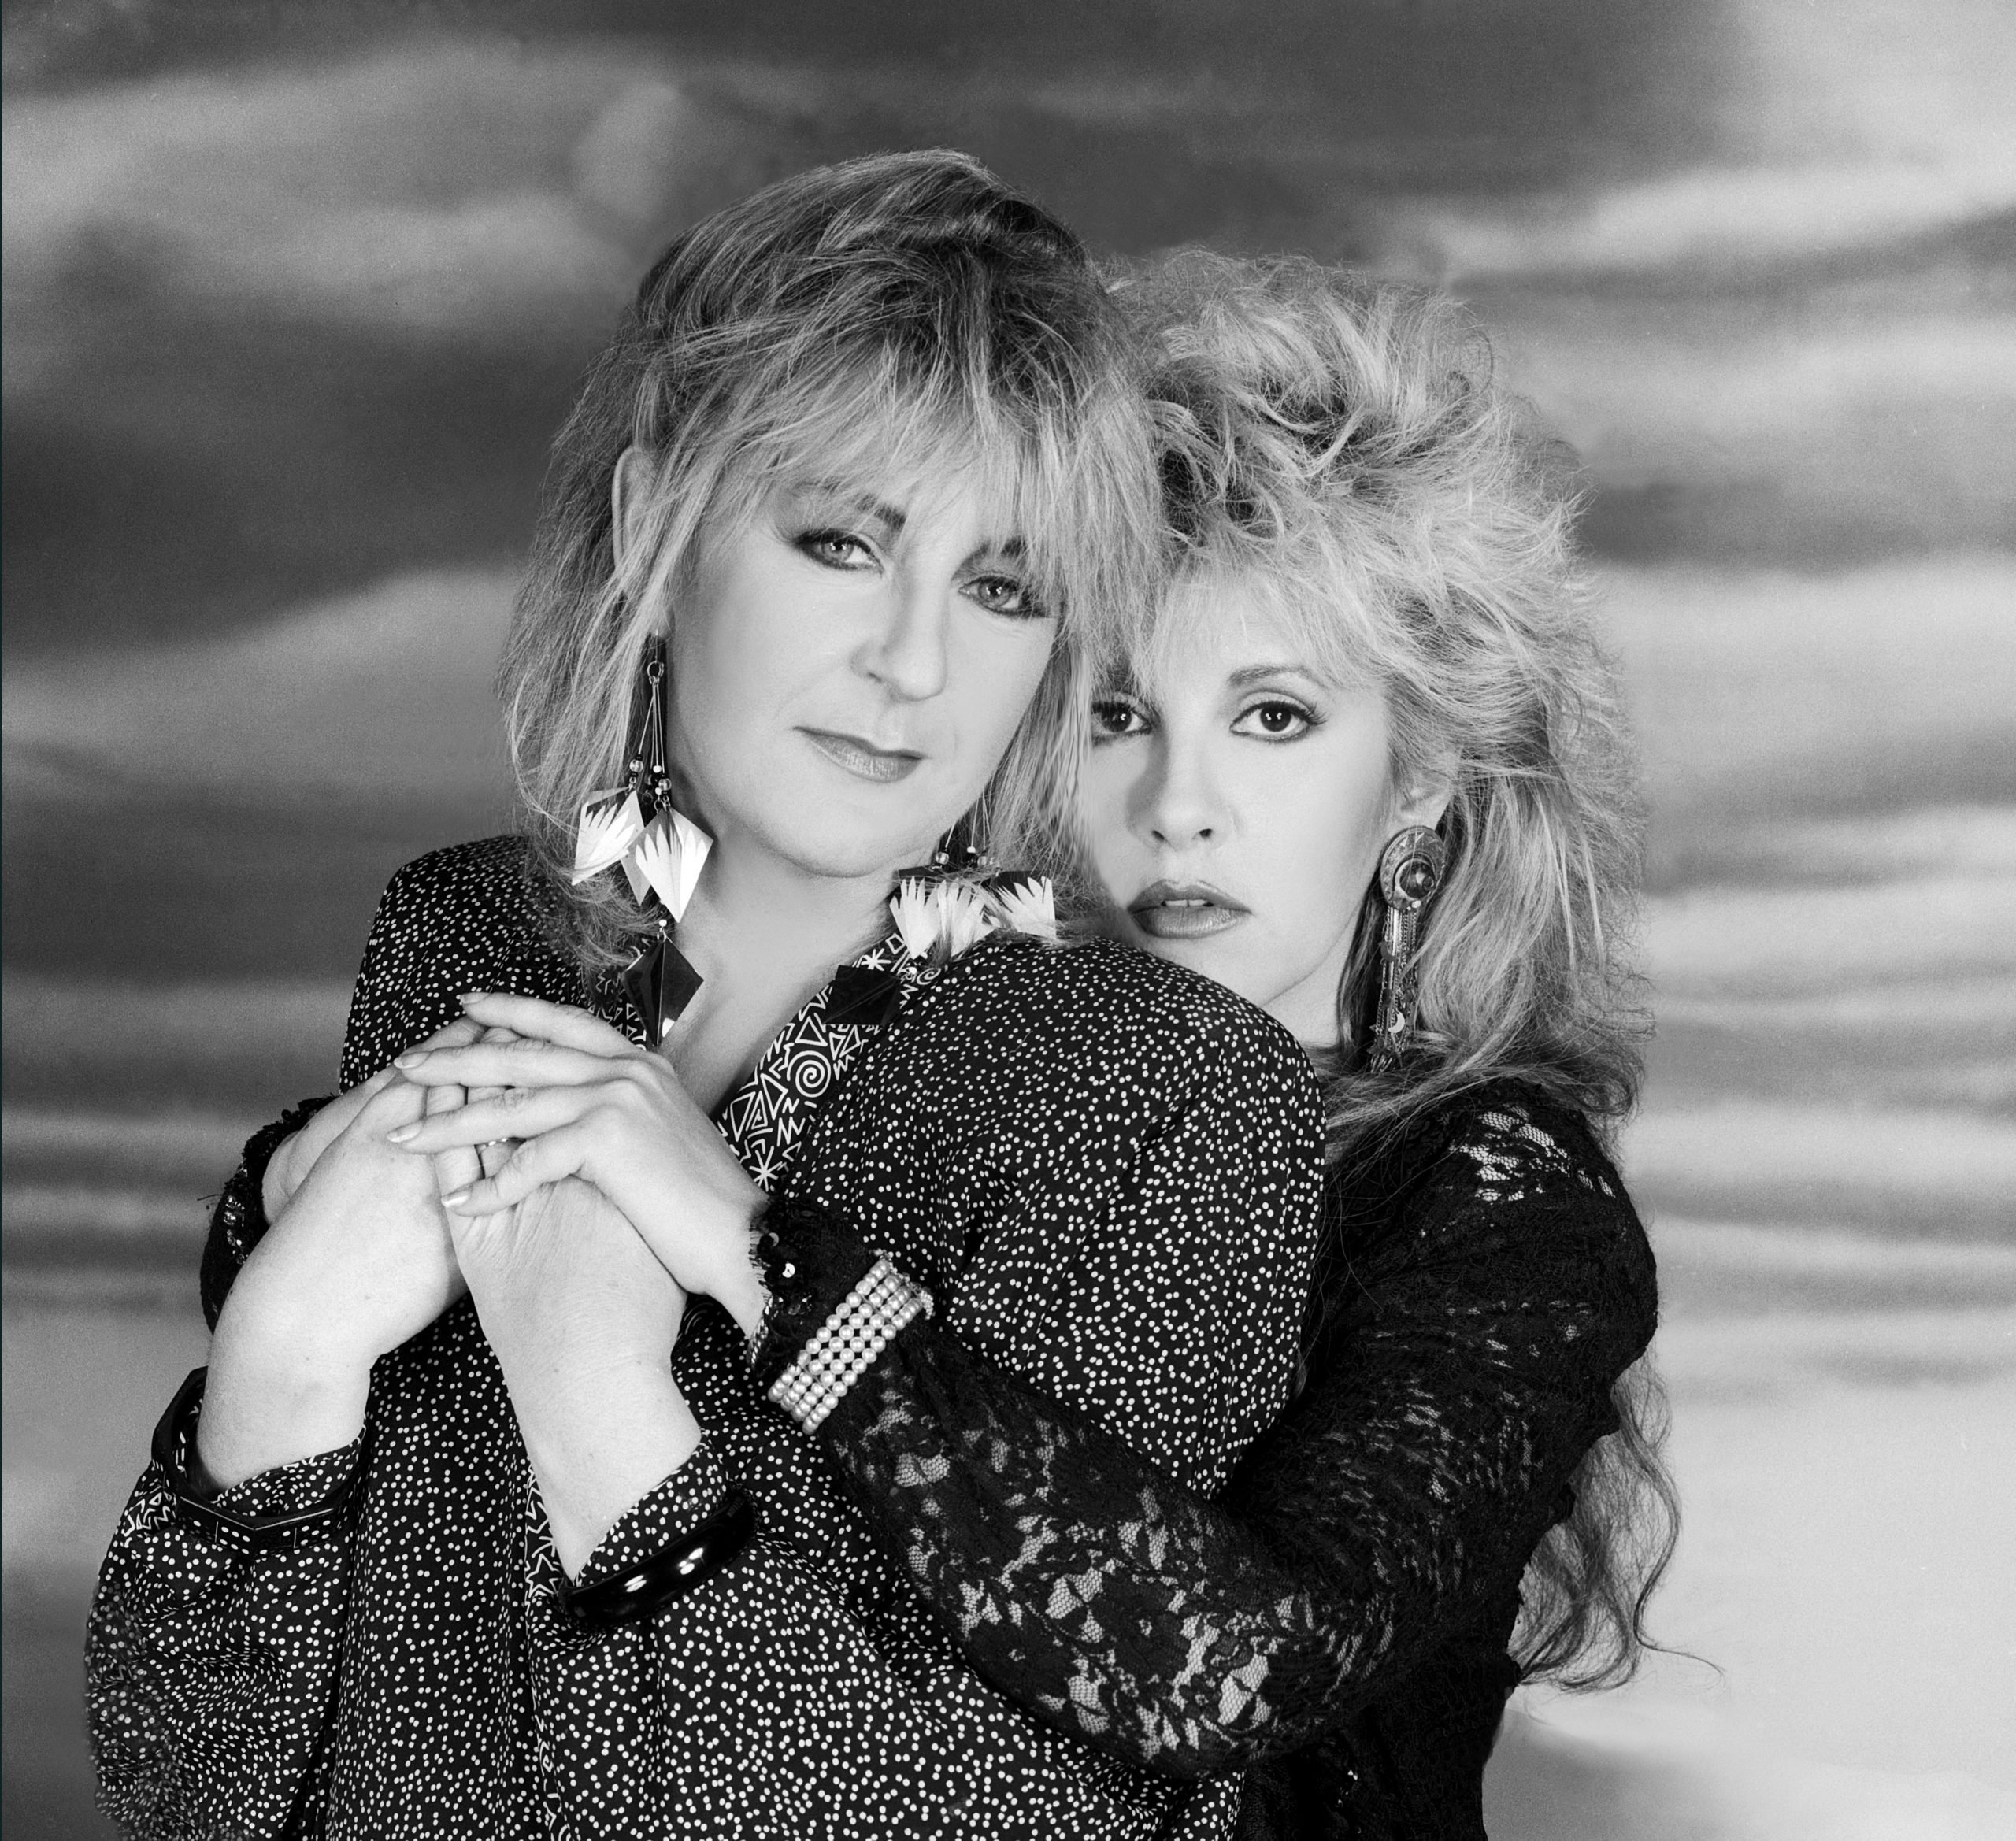 Stevie Nicks and Christine McVie Got Matching Apartments to Get Away From Their Male Bandmates